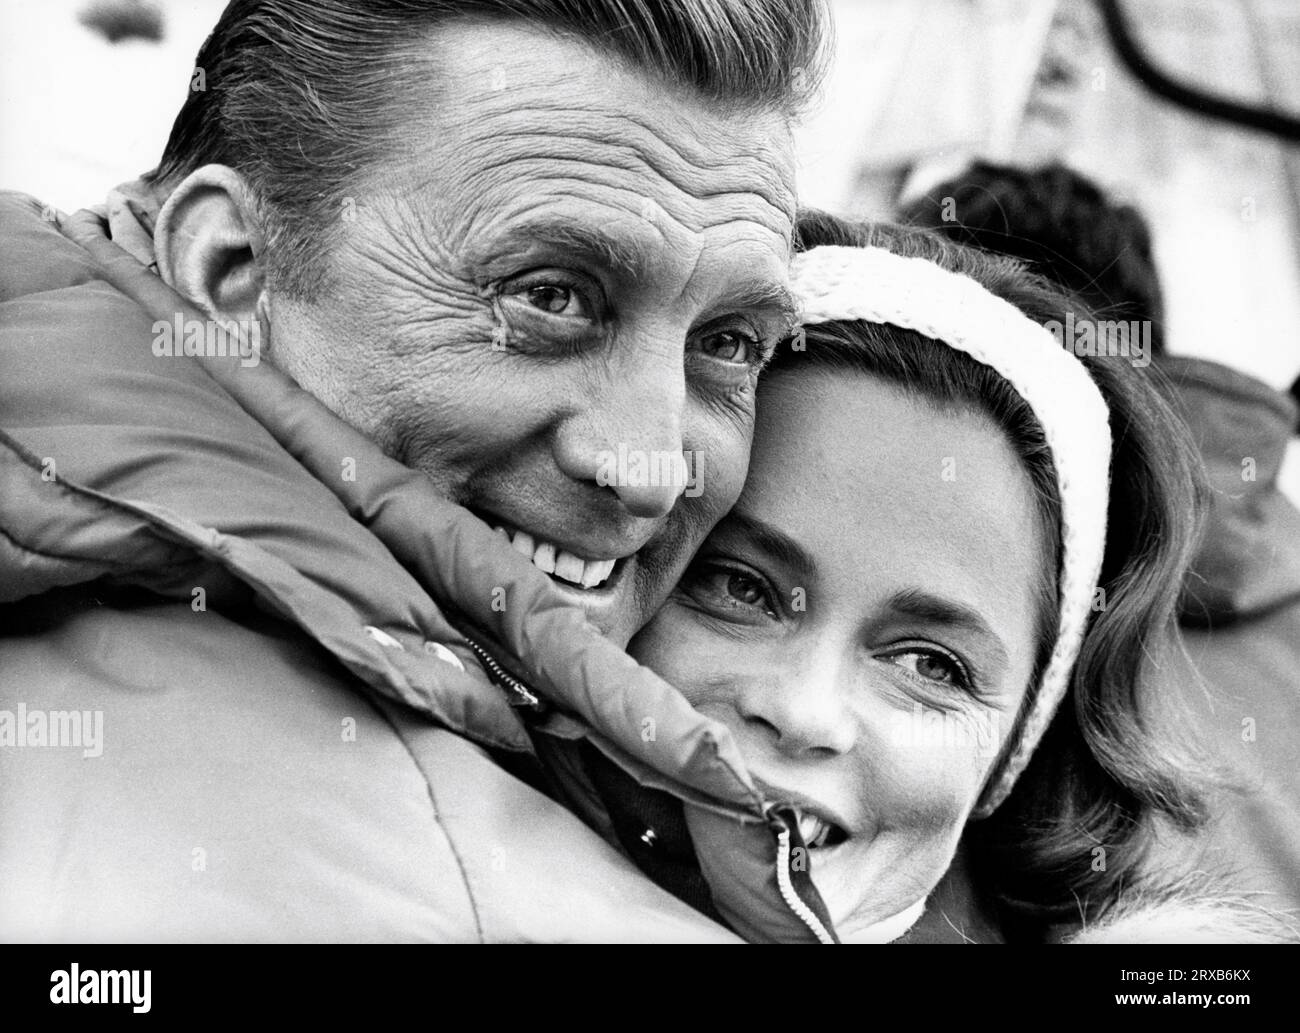 KIRK DOUGLAS and ULLA JACOBSSON on set location candid in Norway during filming of THE HEROES OF TELEMARK 1965 director ANTHONY MANN novel Knut Haukelid and John Drummond screenplay Ivan Moffat and Ben Barzman and (uncredited) Harold Pinter music Malcolm Arnold Benton Film Productions / Rank Film Distributors (UK) - Columbia Pictures (US) Stock Photo